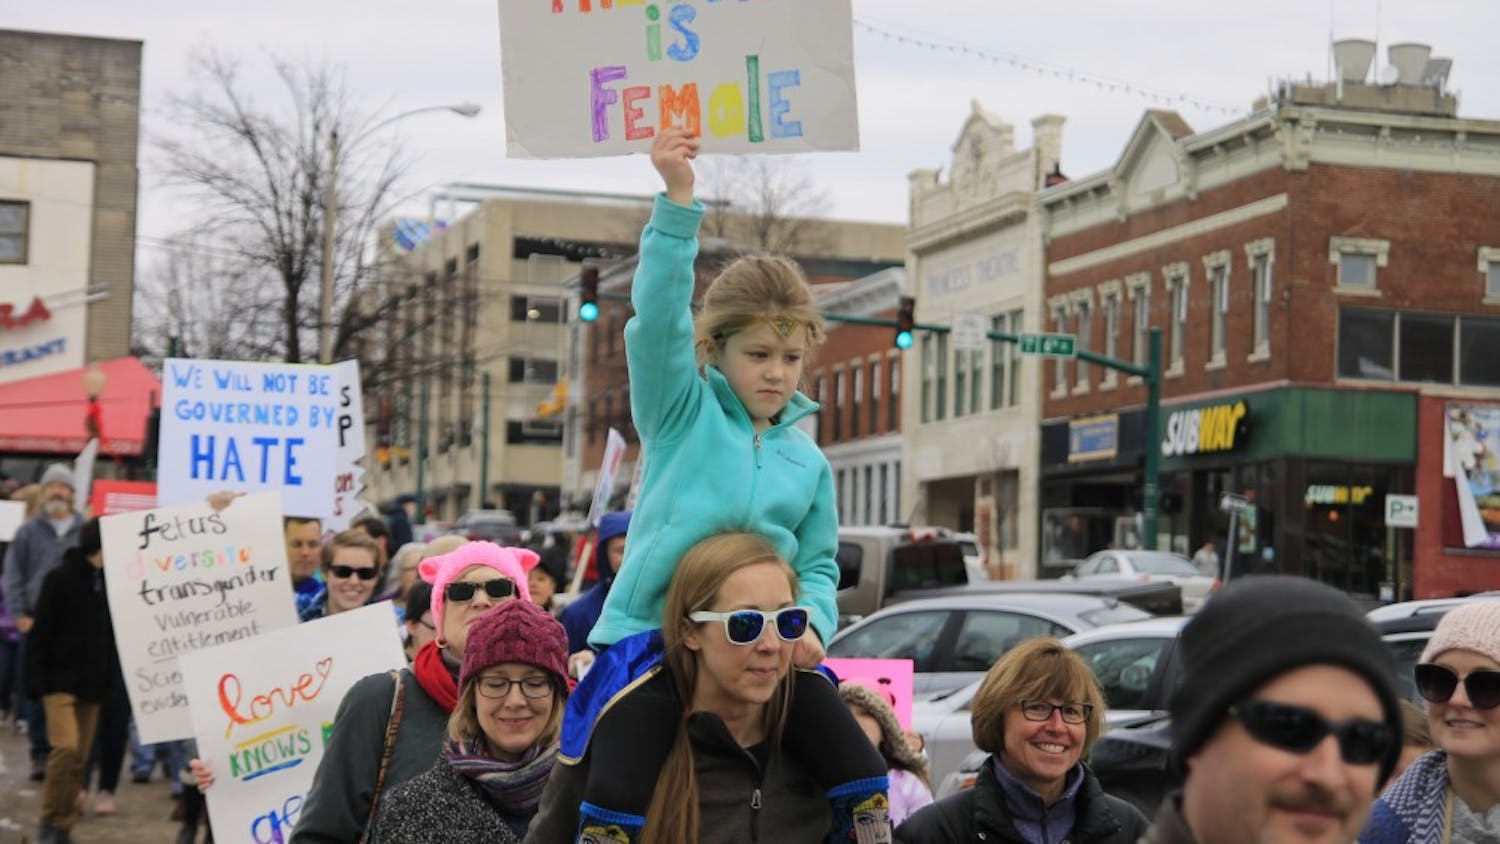 Many members of the march were accompanied by children, helping to hold signs and advocate for women's rights. The Bloomington Resistance March took place Saturday, Jan. 20 at Courthouse Square in Bloomington and held speeches and a march attended by hundreds of Bloomington residents and IU students.&nbsp;